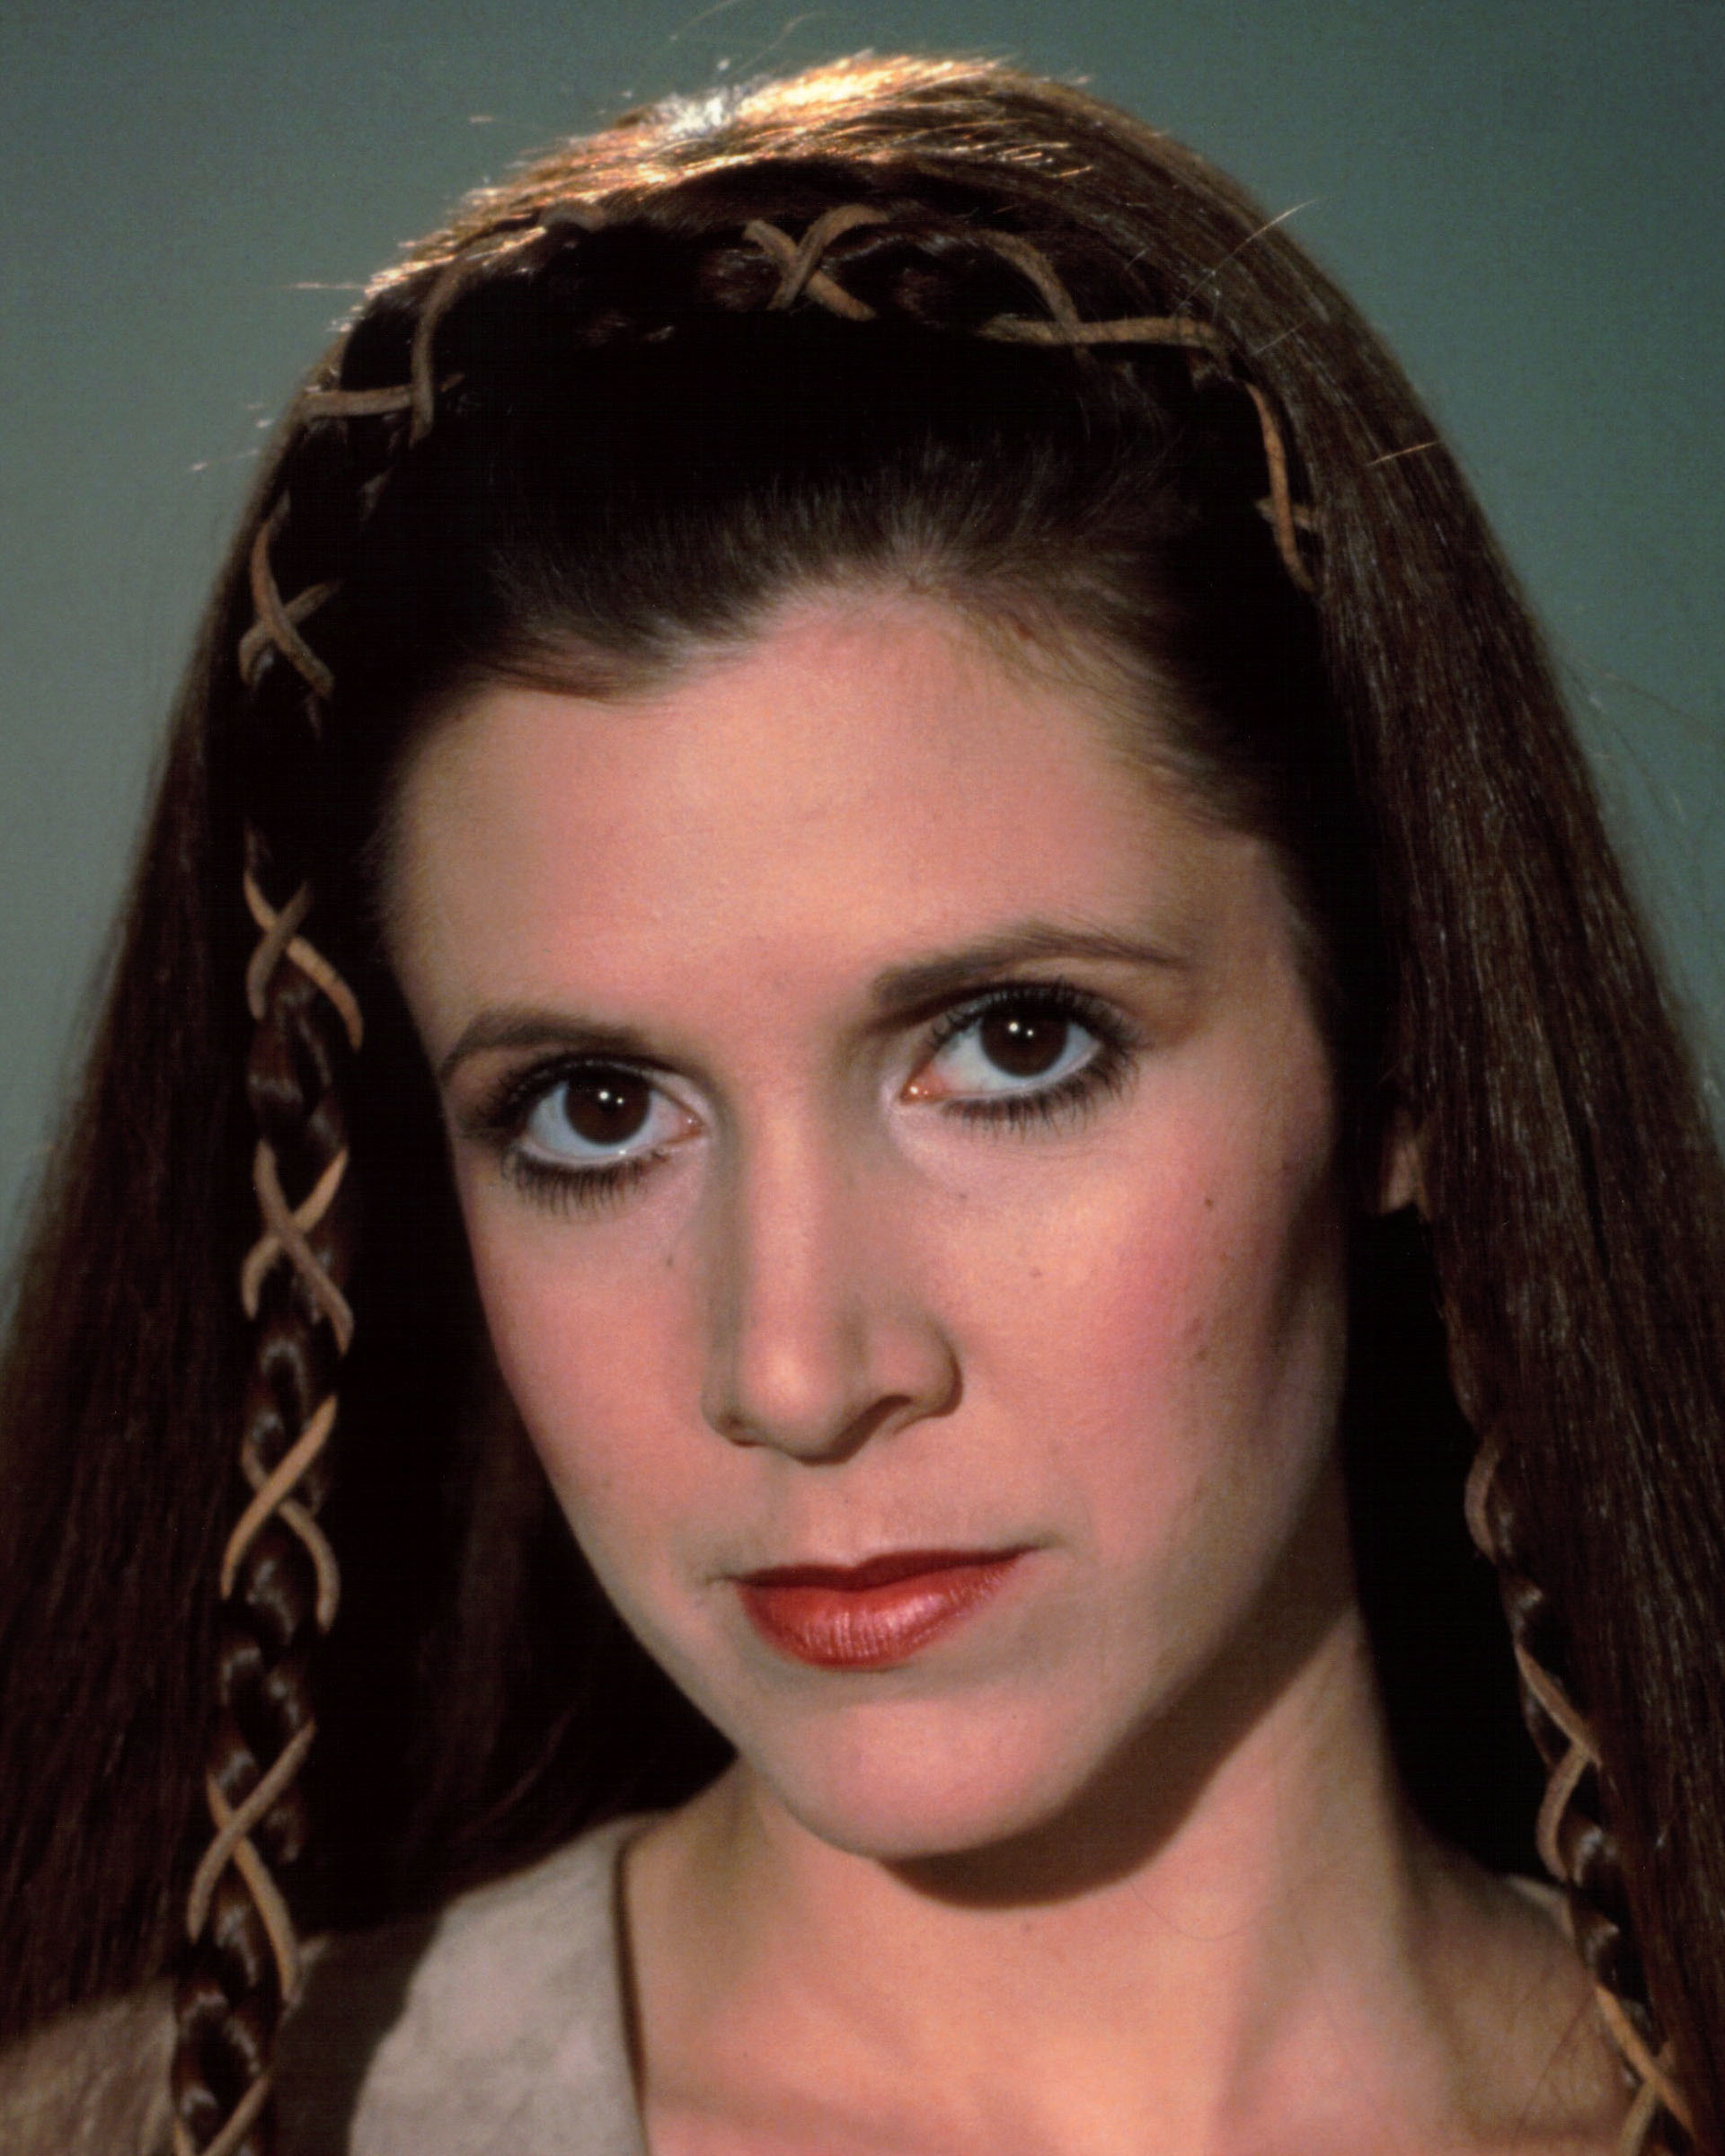 Albums 91+ Images a picture of princess leia from star wars Sharp